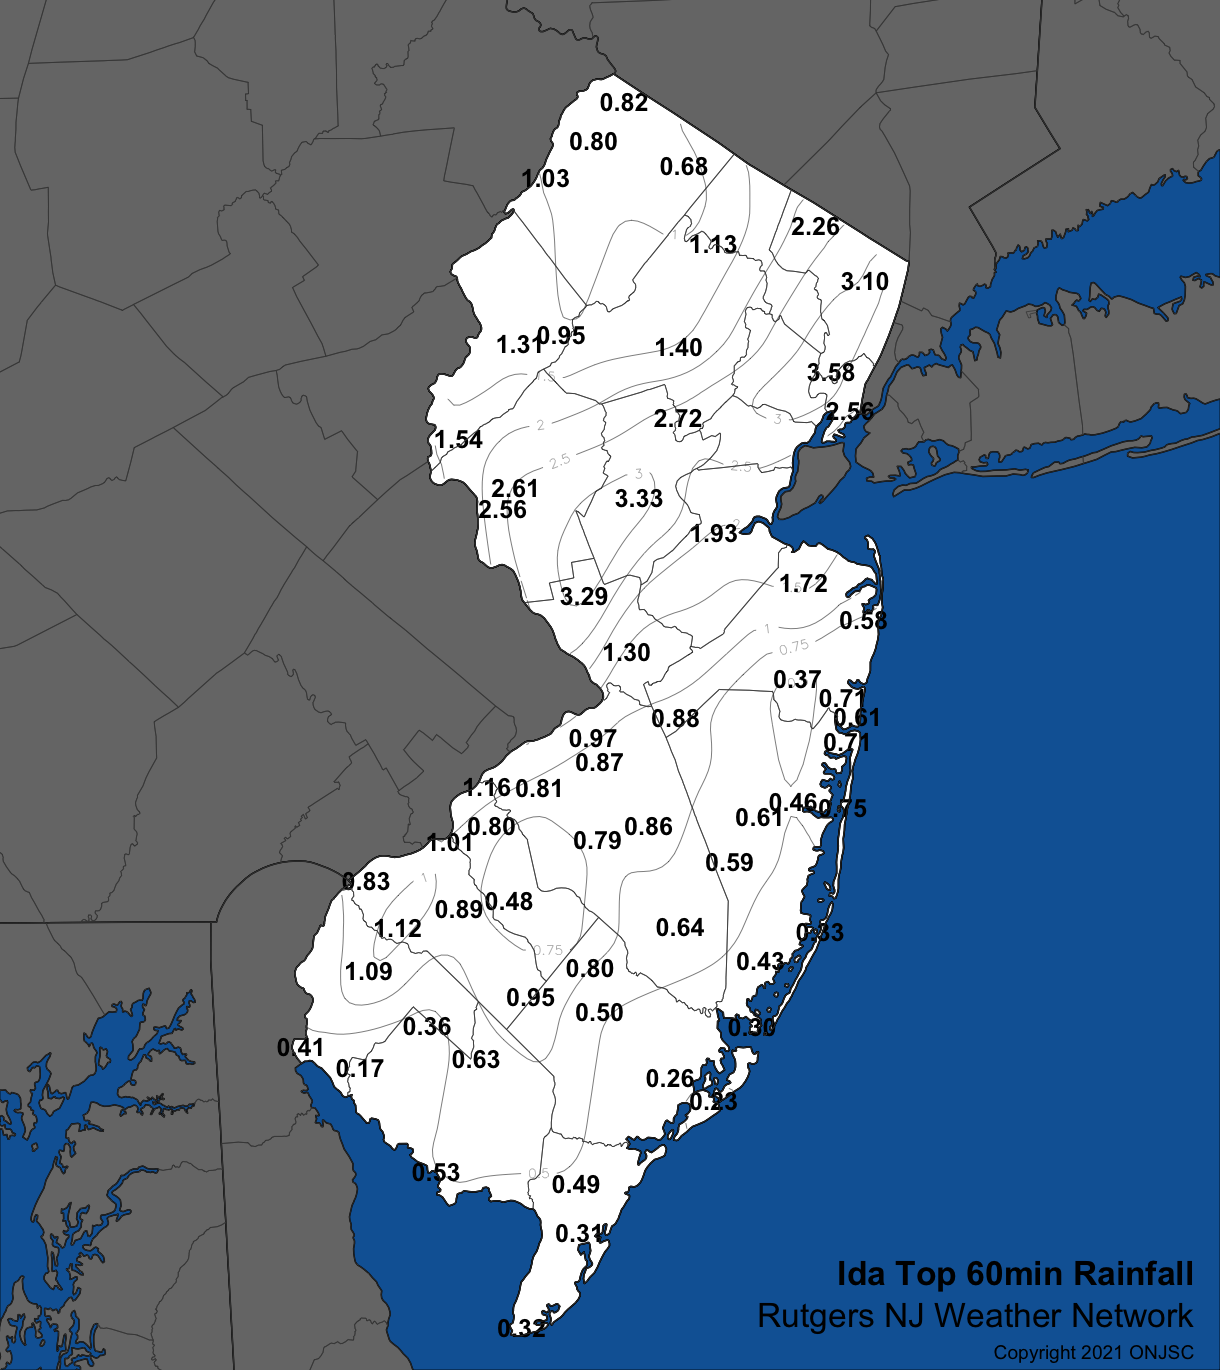 Peak one-hour rainfall across NJ based on observations from Rutgers NJWxNet stations and the Newark Airport NWS station.